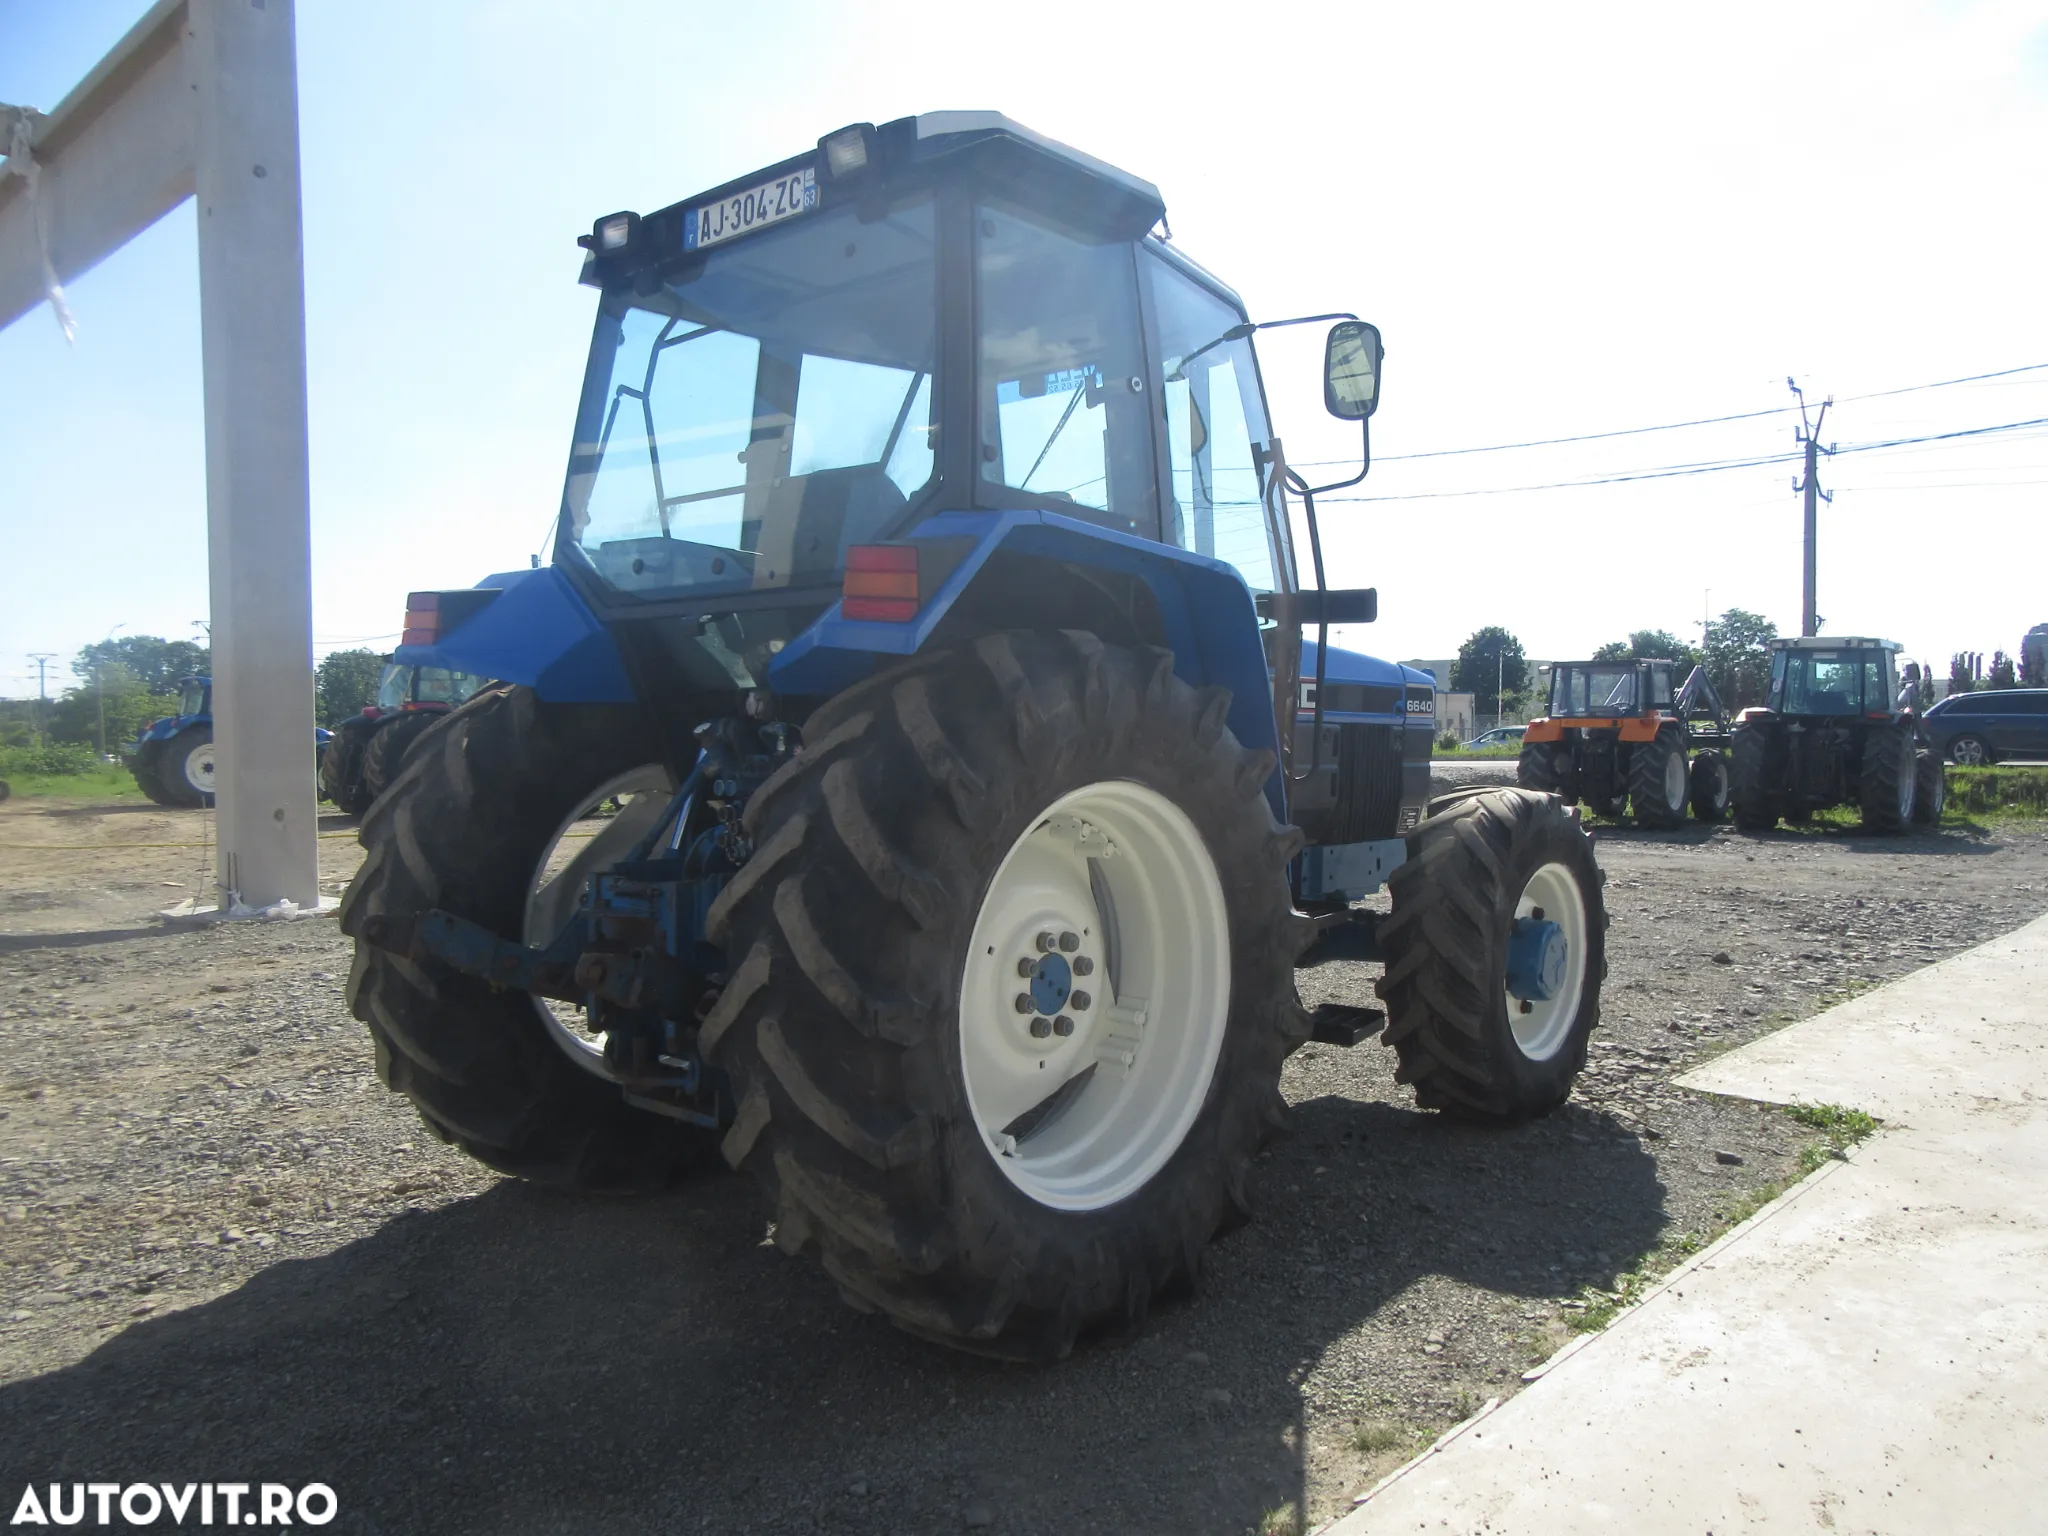 New Holland Ford 6640 - 6